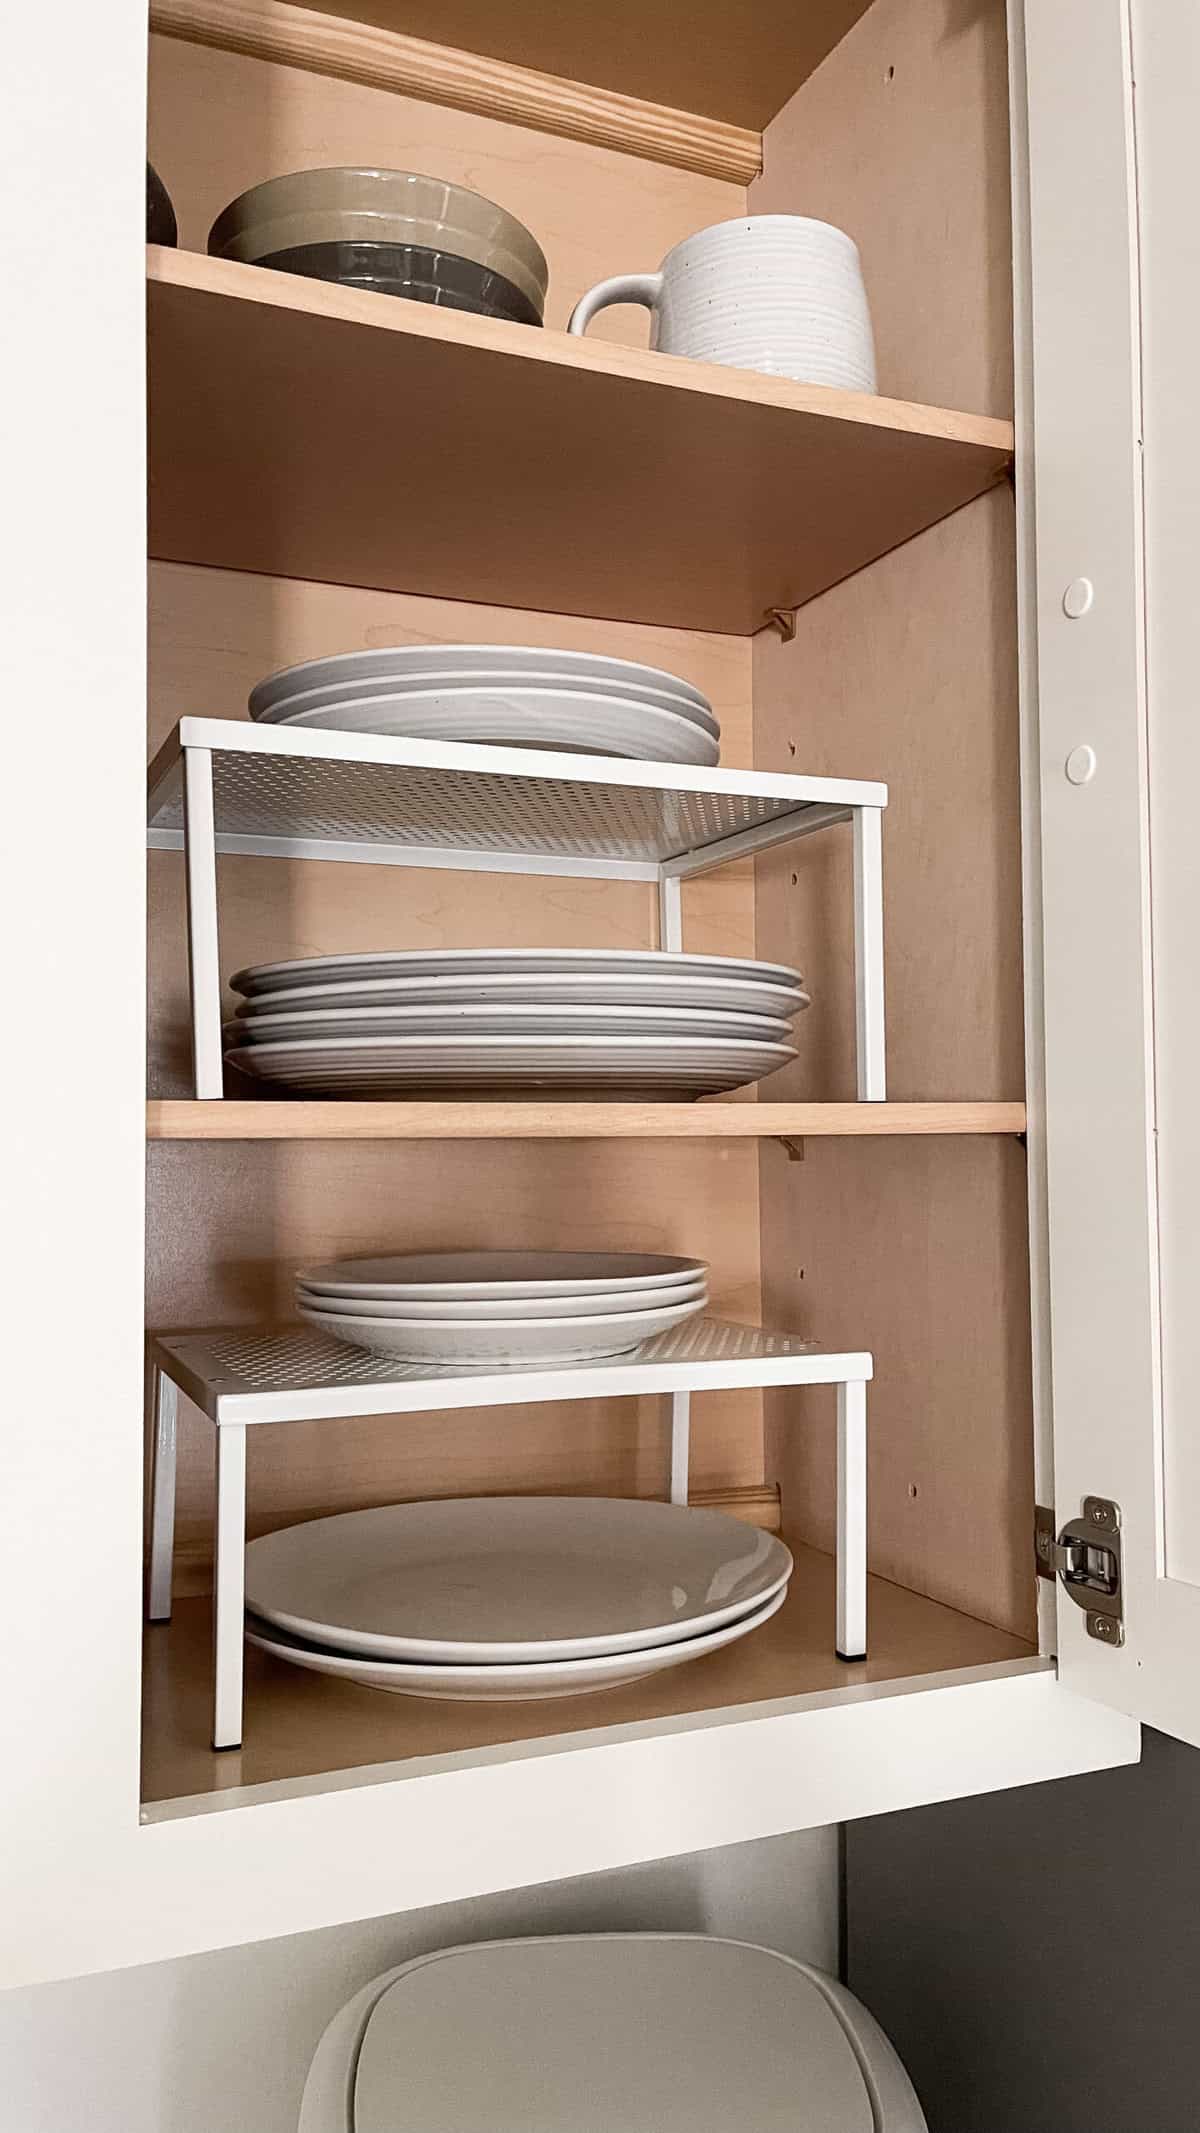 Kitchen Organization Ideas for a Small Apartment